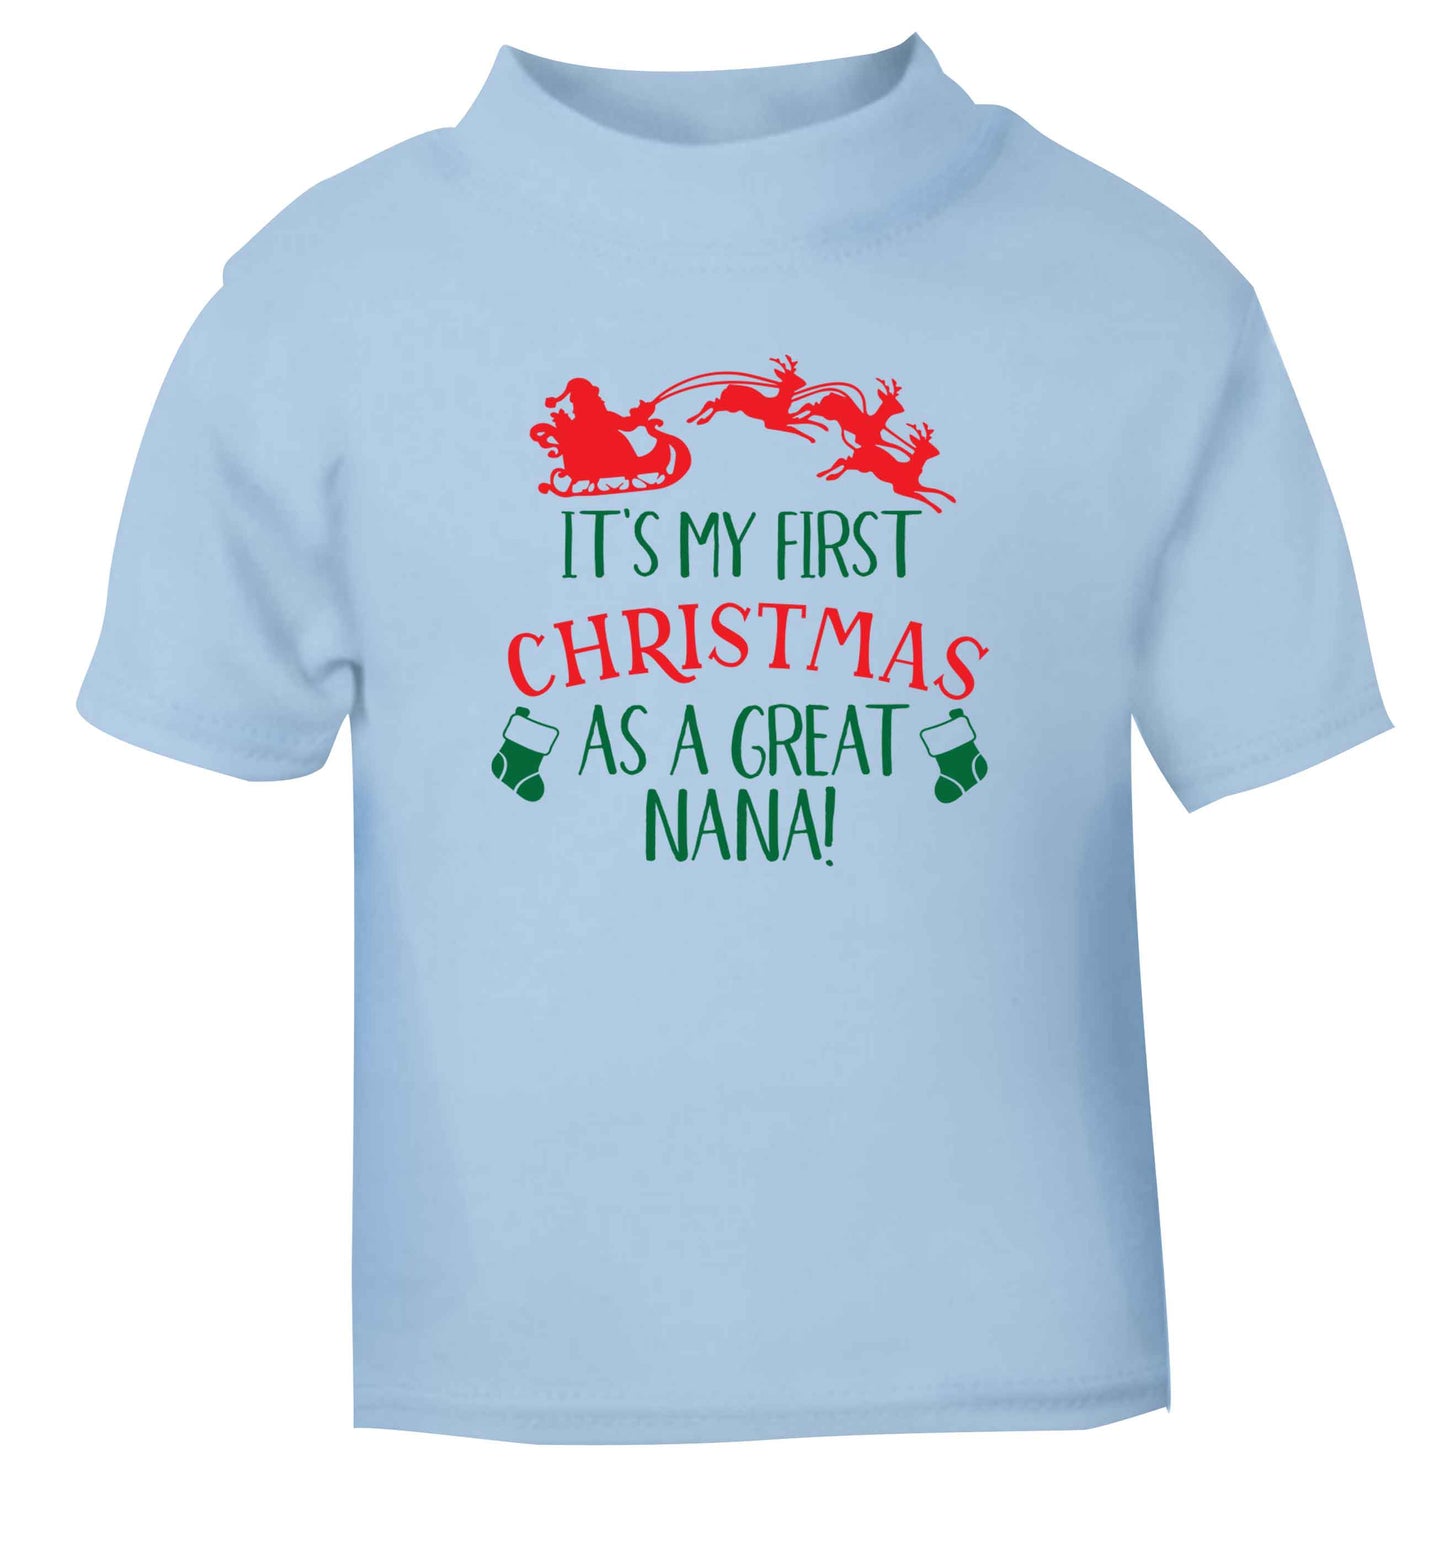 It's my first Christmas as a great nana! light blue Baby Toddler Tshirt 2 Years